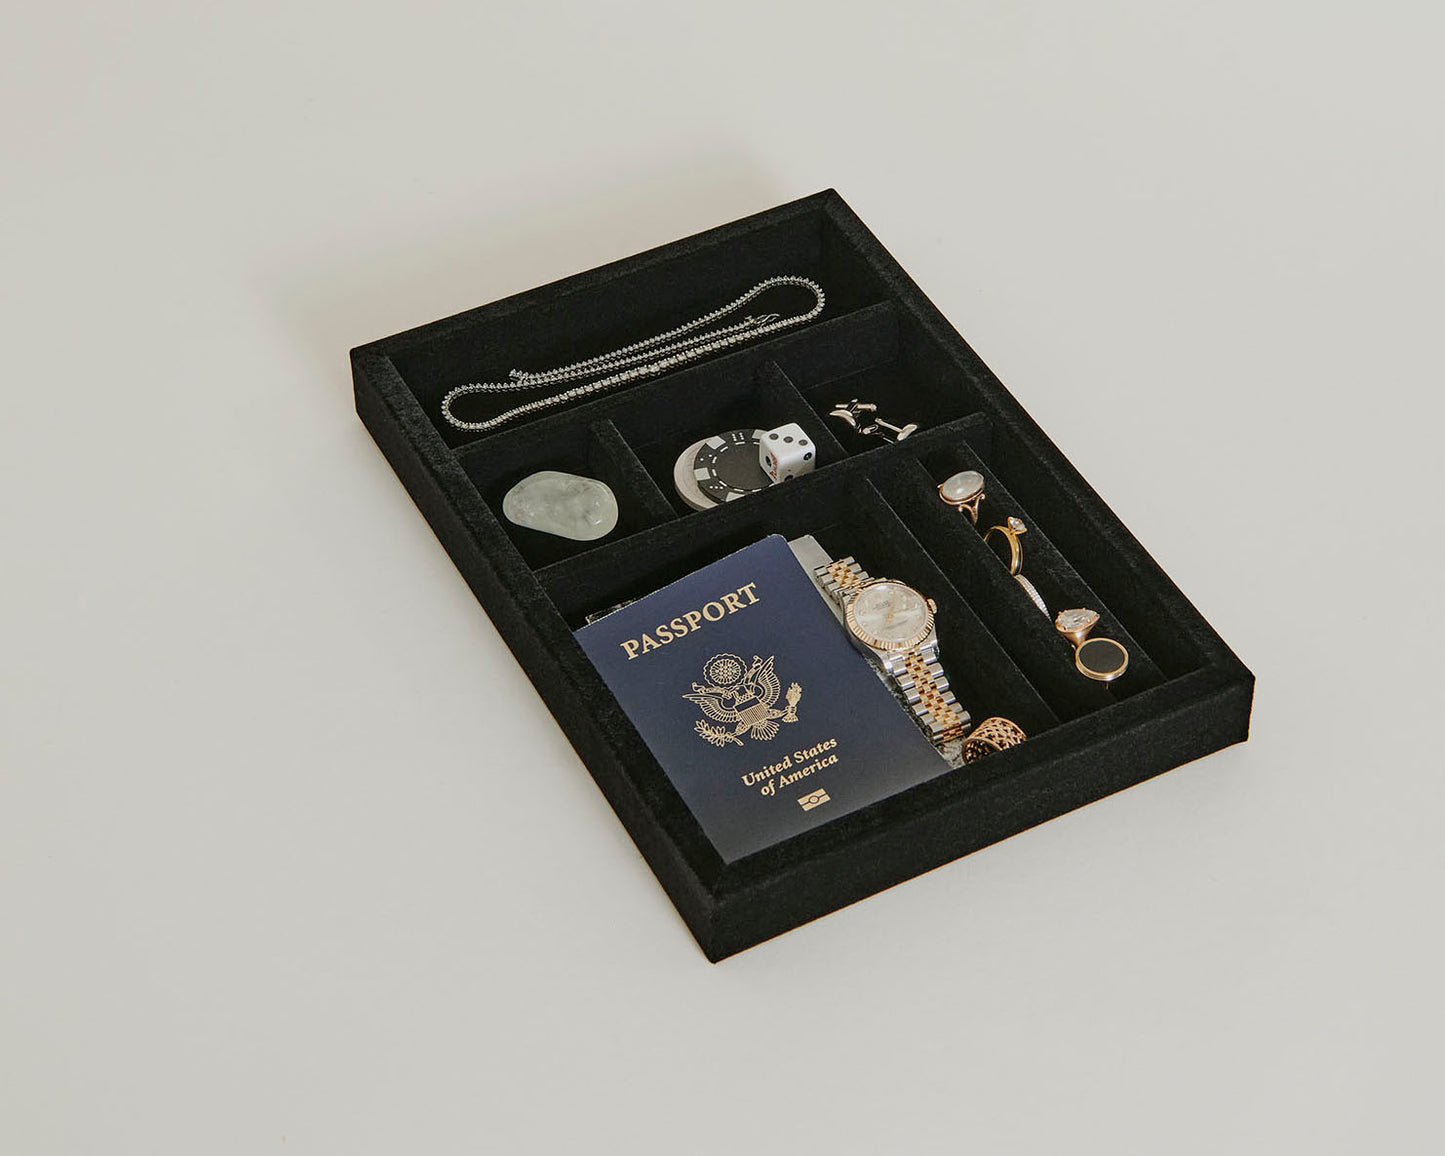 Black Fire Safe Tray with jewelry and a passport in it